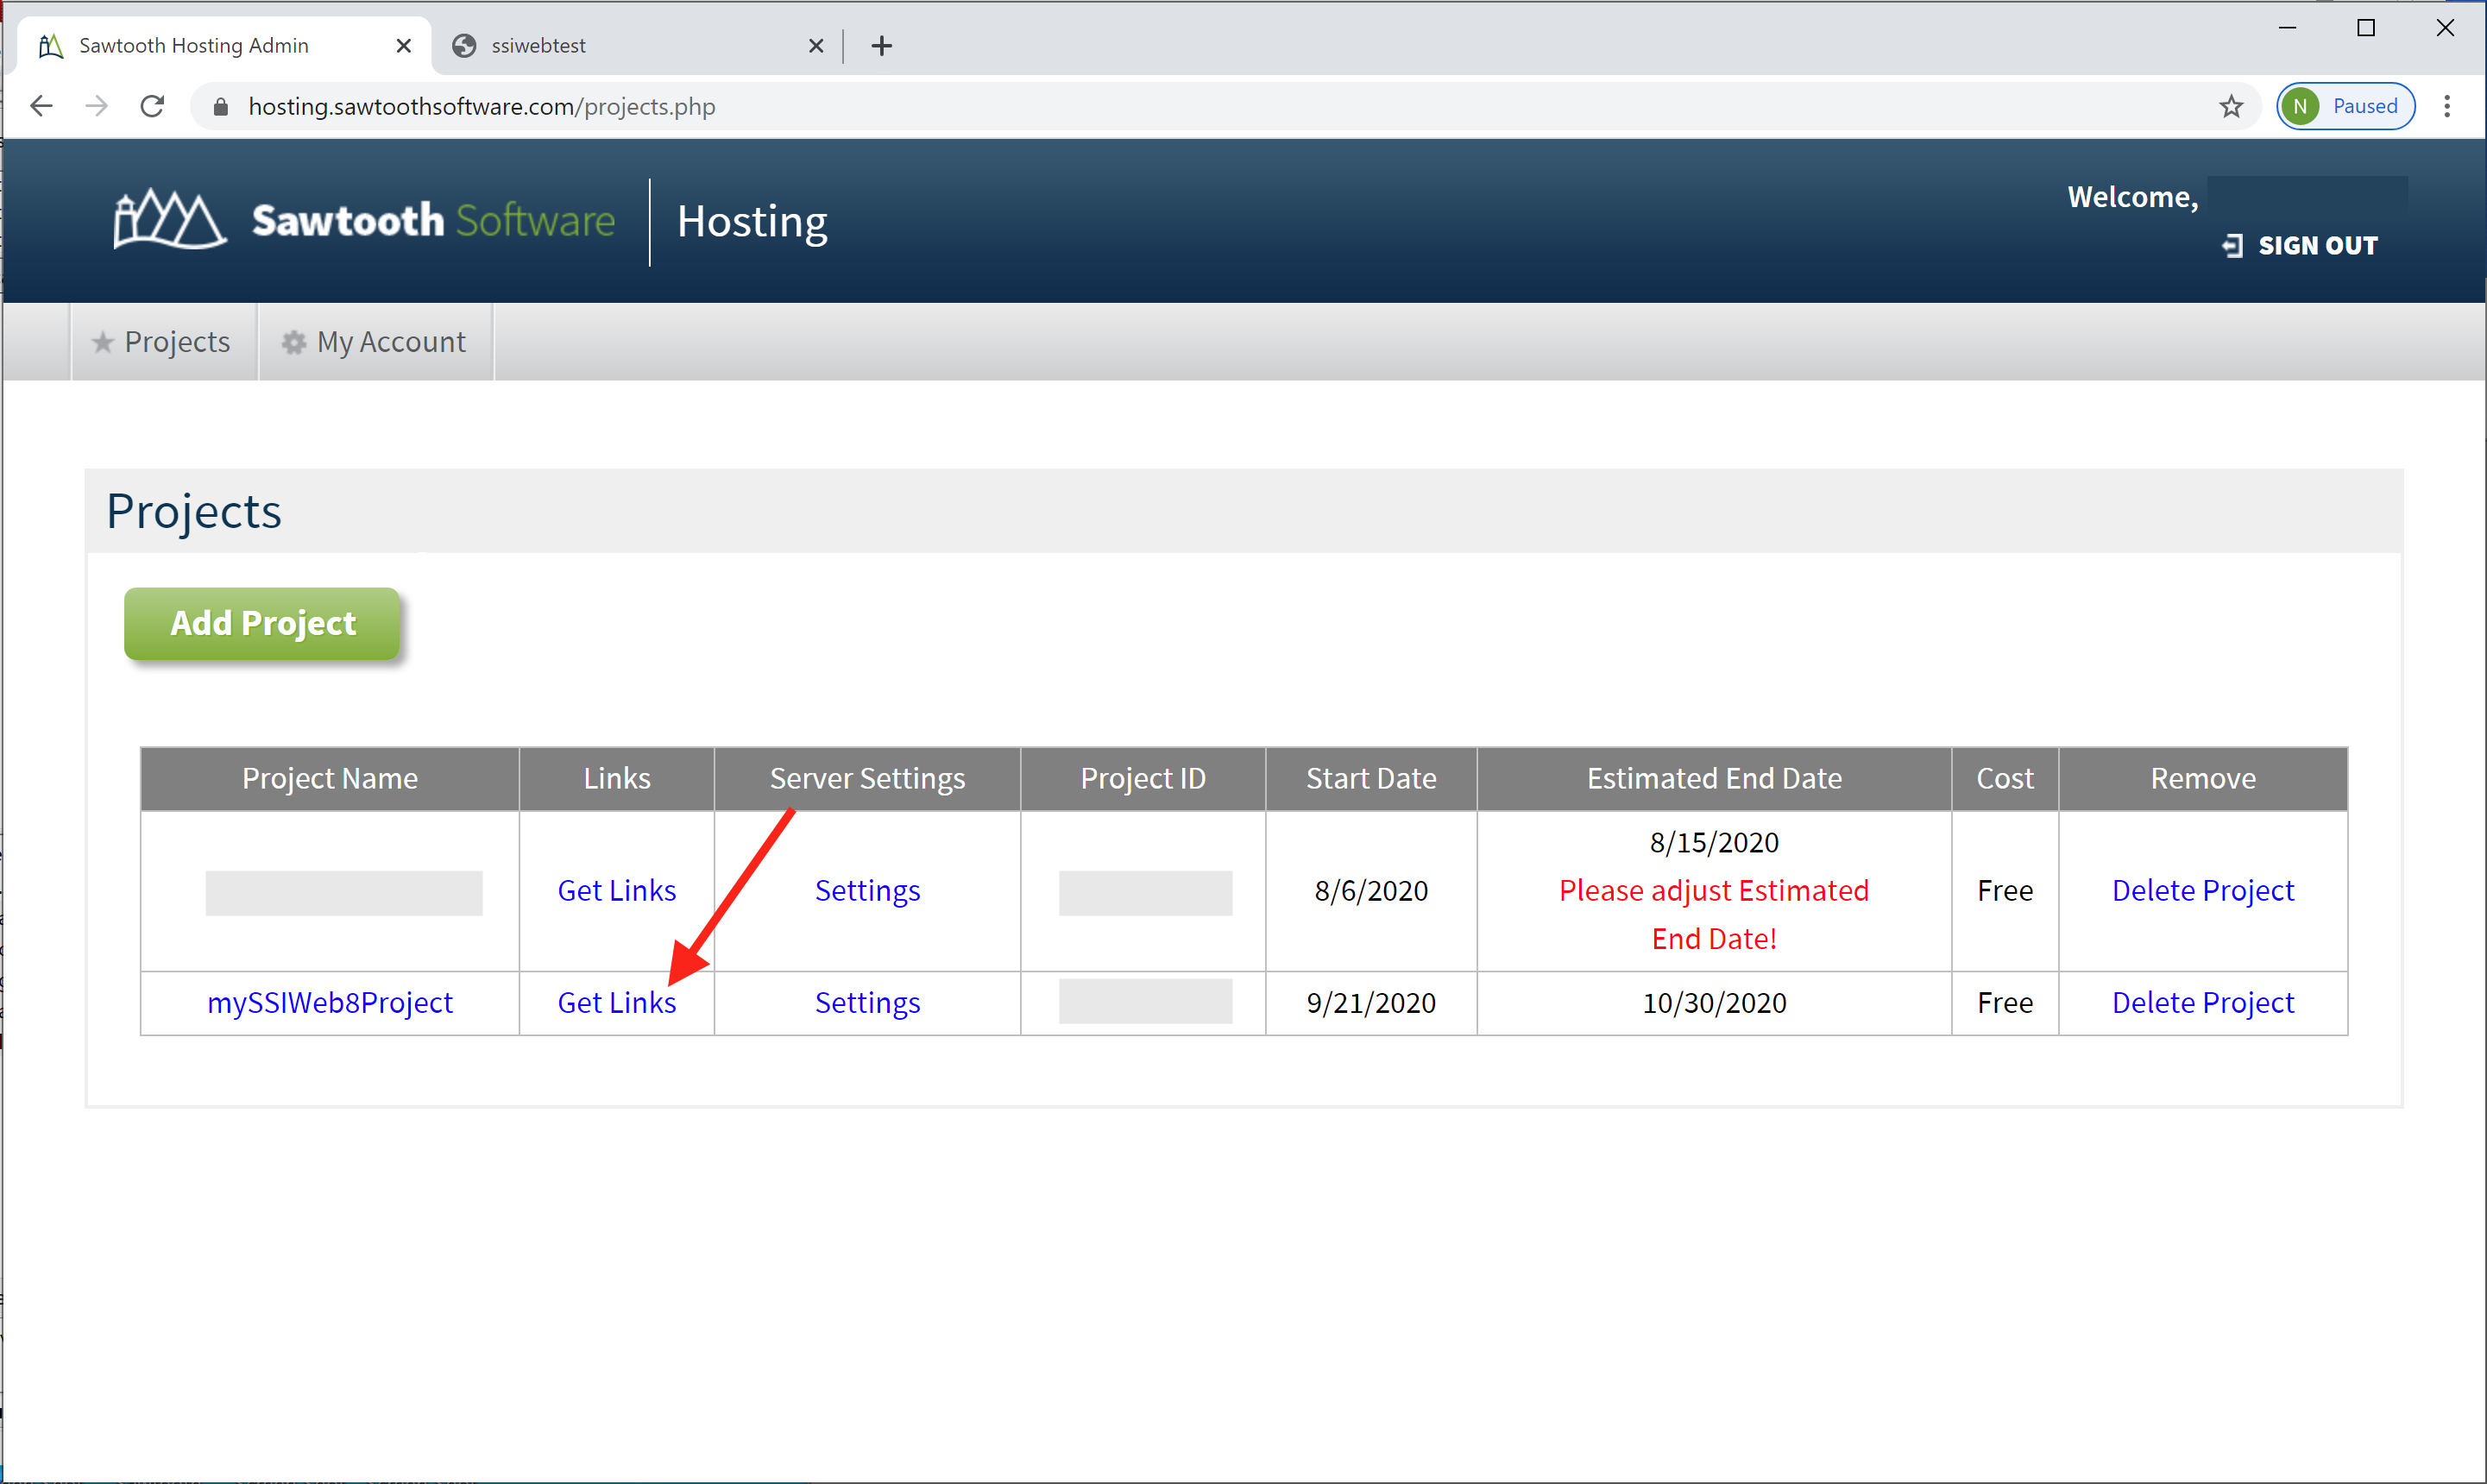 Screen Shot pointing out the "Get Links" link in the Sawtooth Software hosting portal interface.